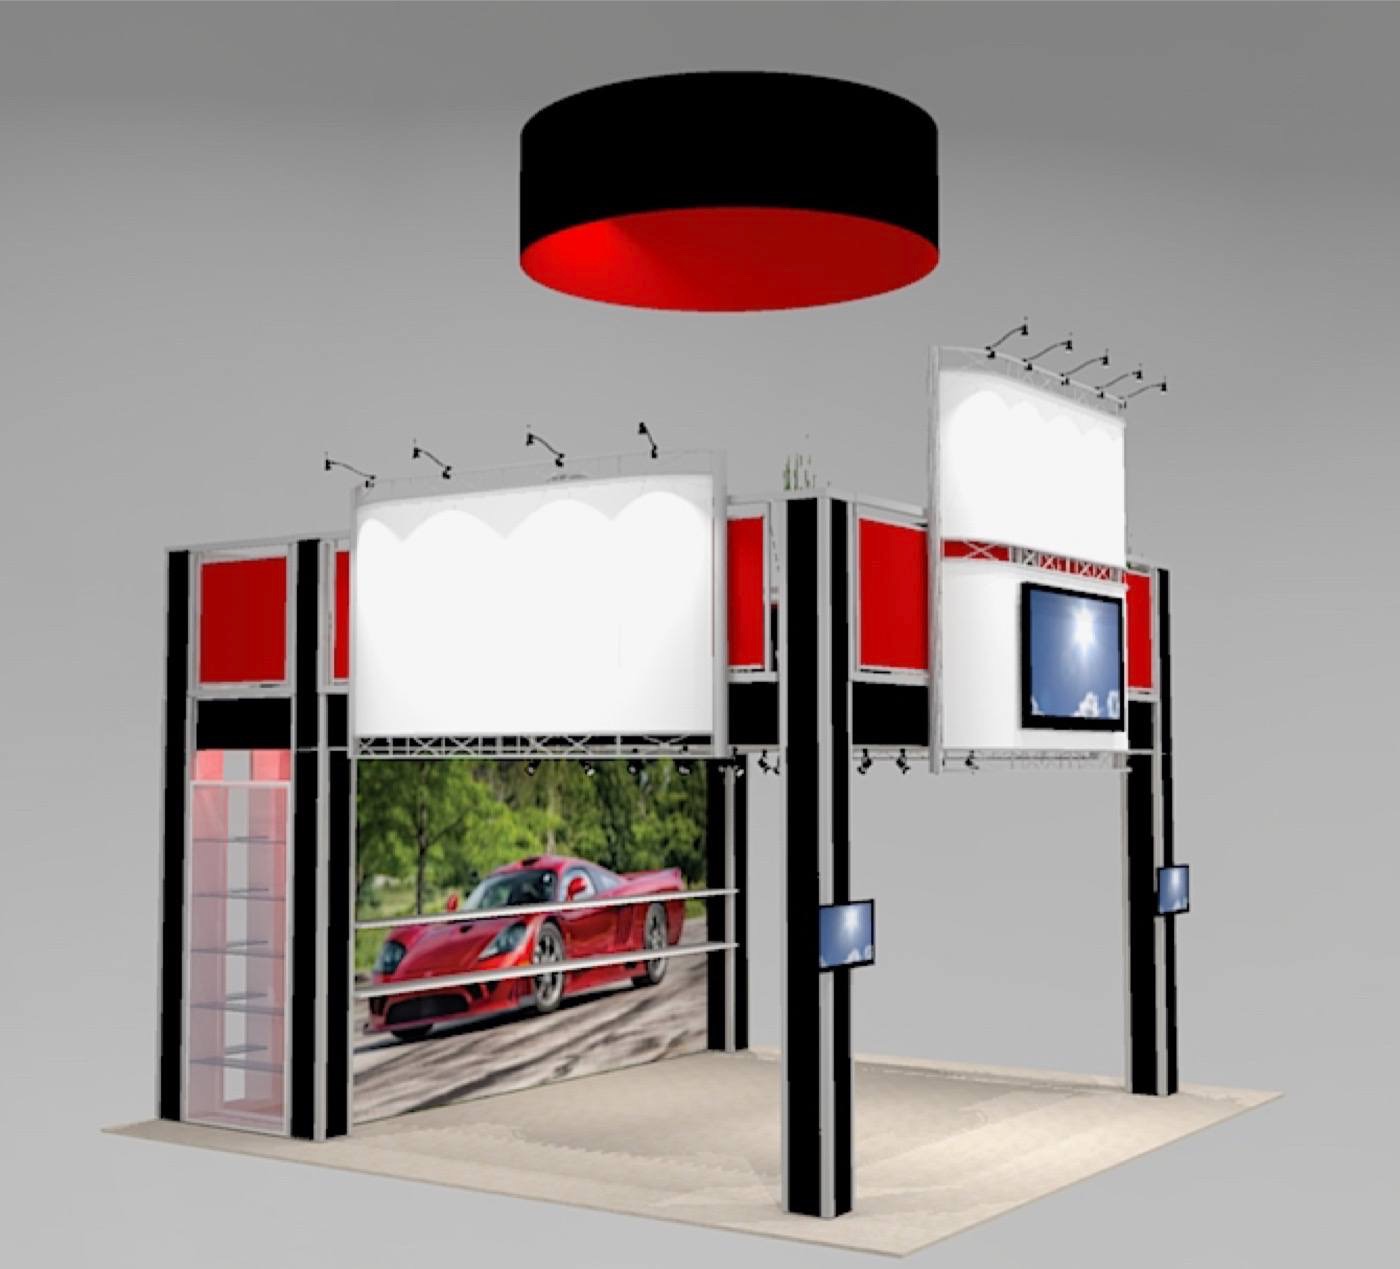 trade show rental design for 20 ft. Island trade show booth space